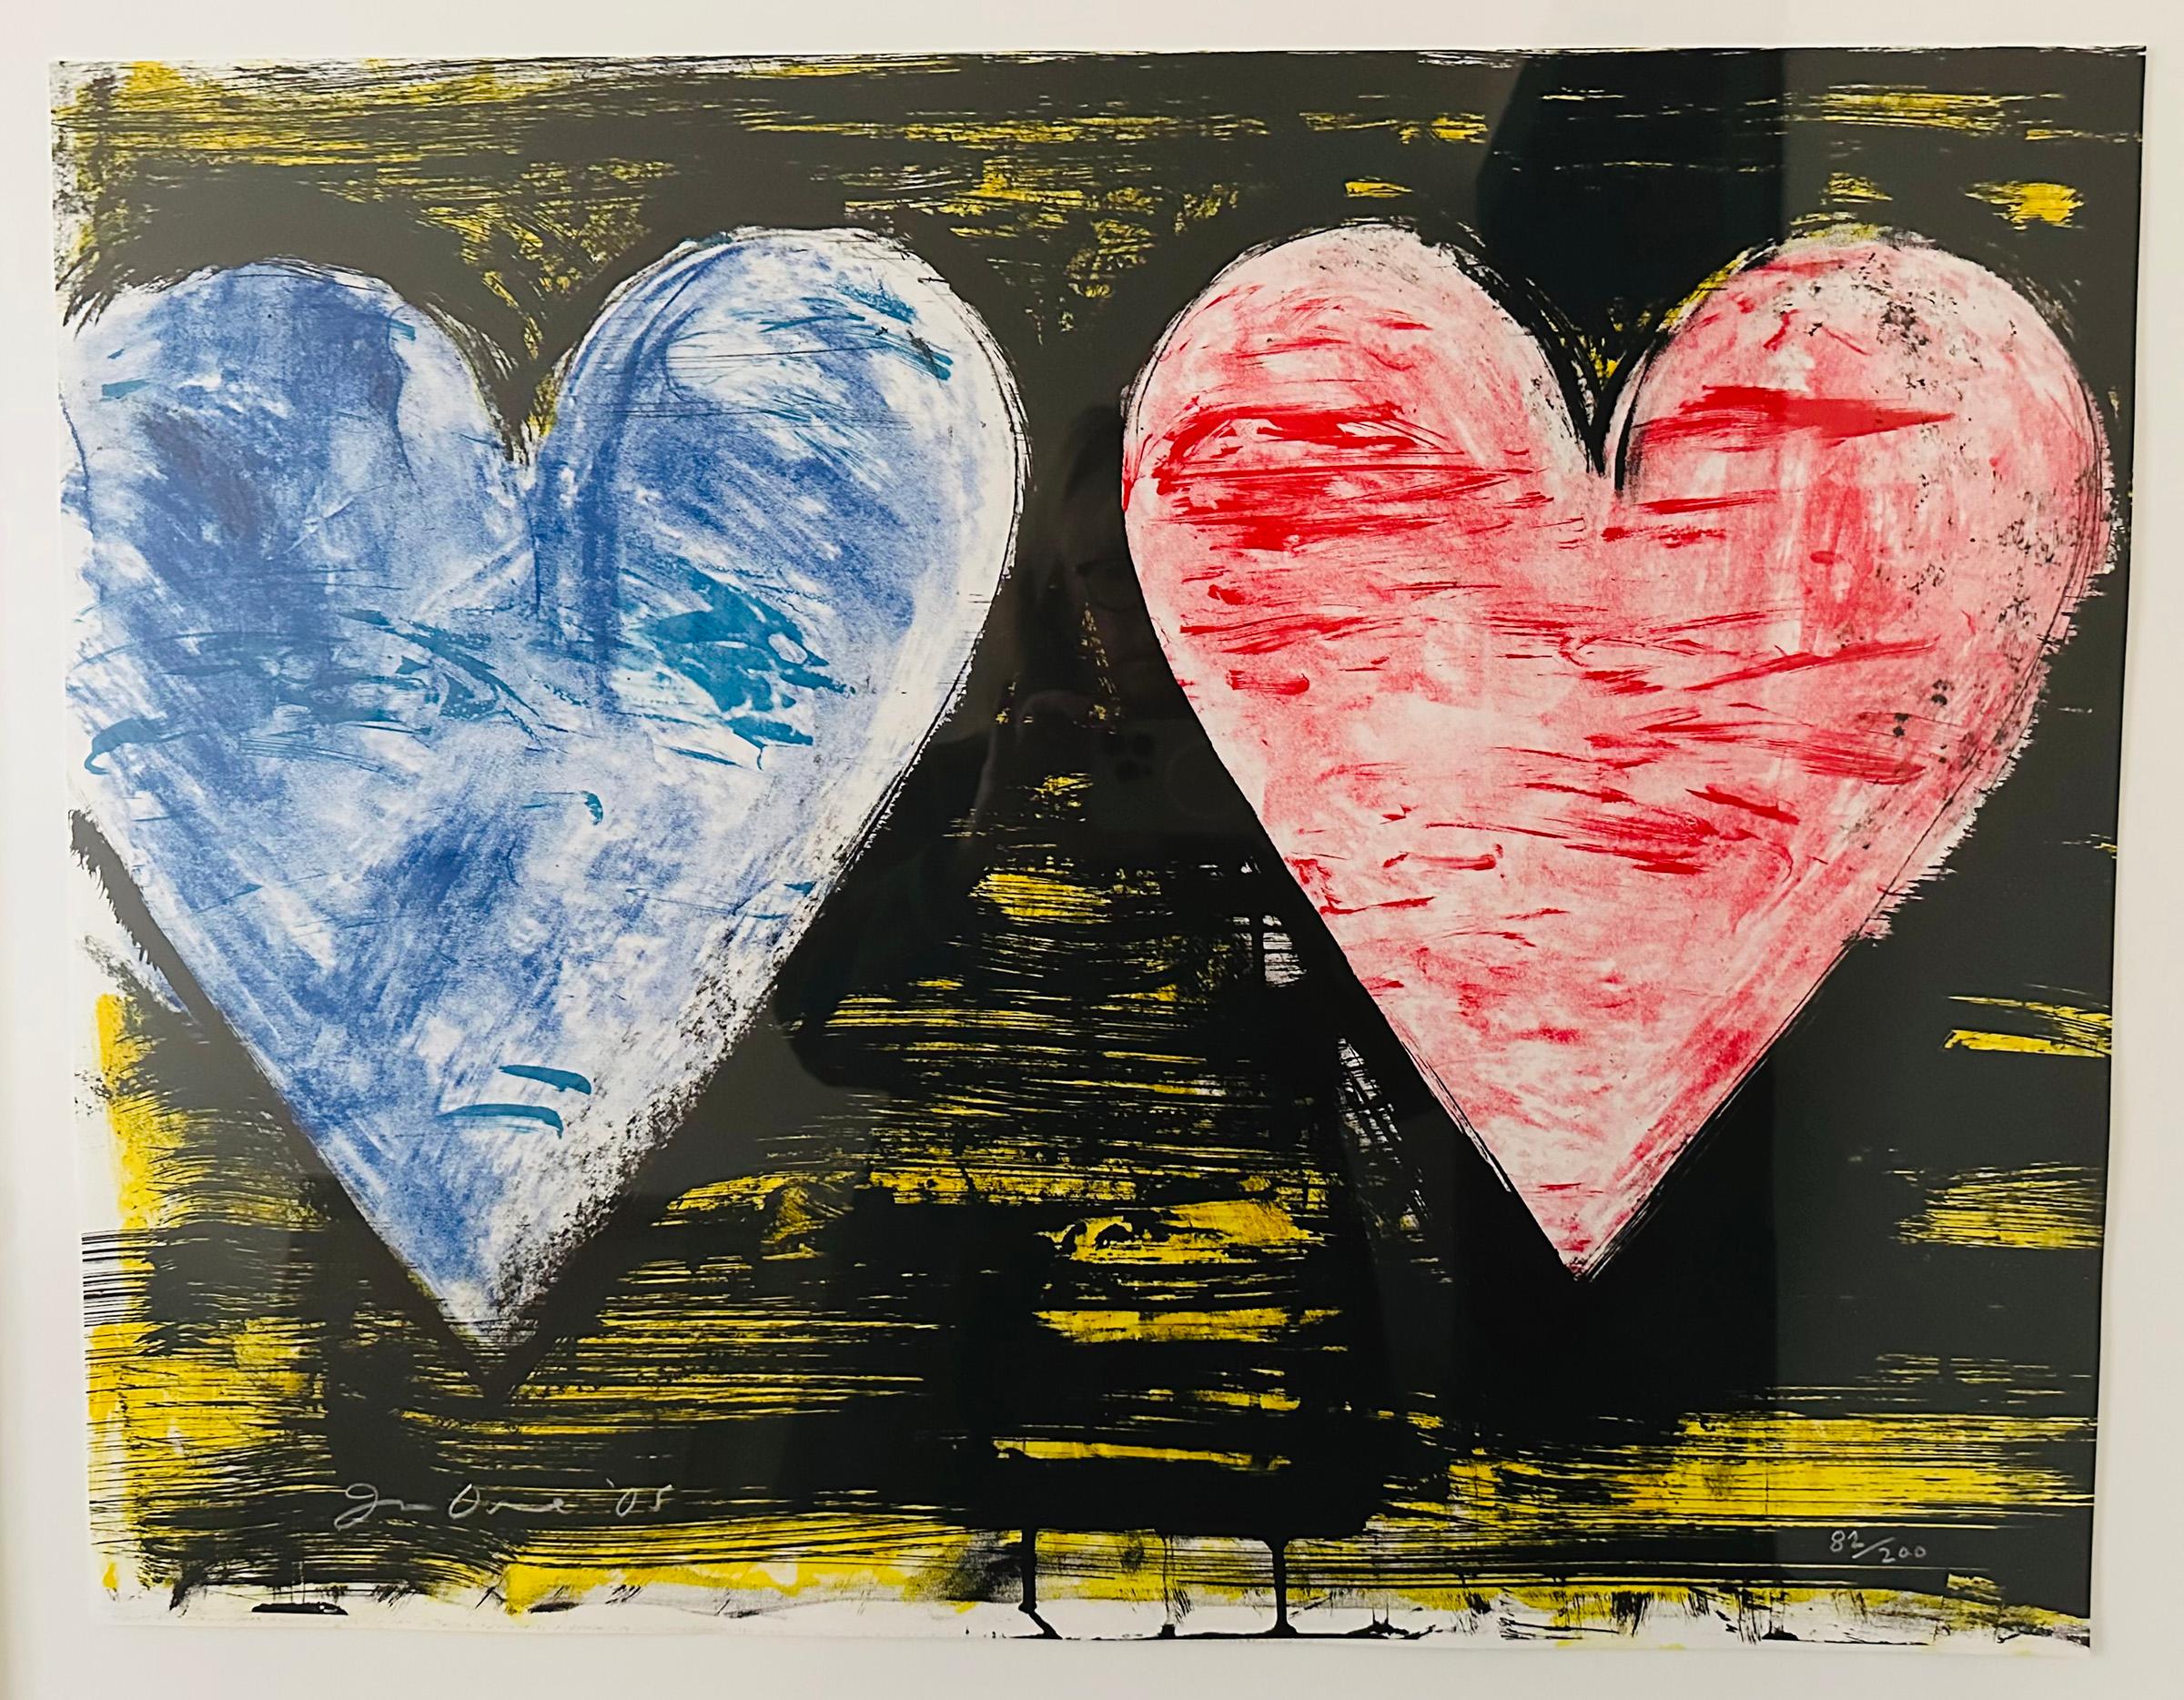 Two Hearts at Sunset, Ed. 82/200 - Print by Jim Dine